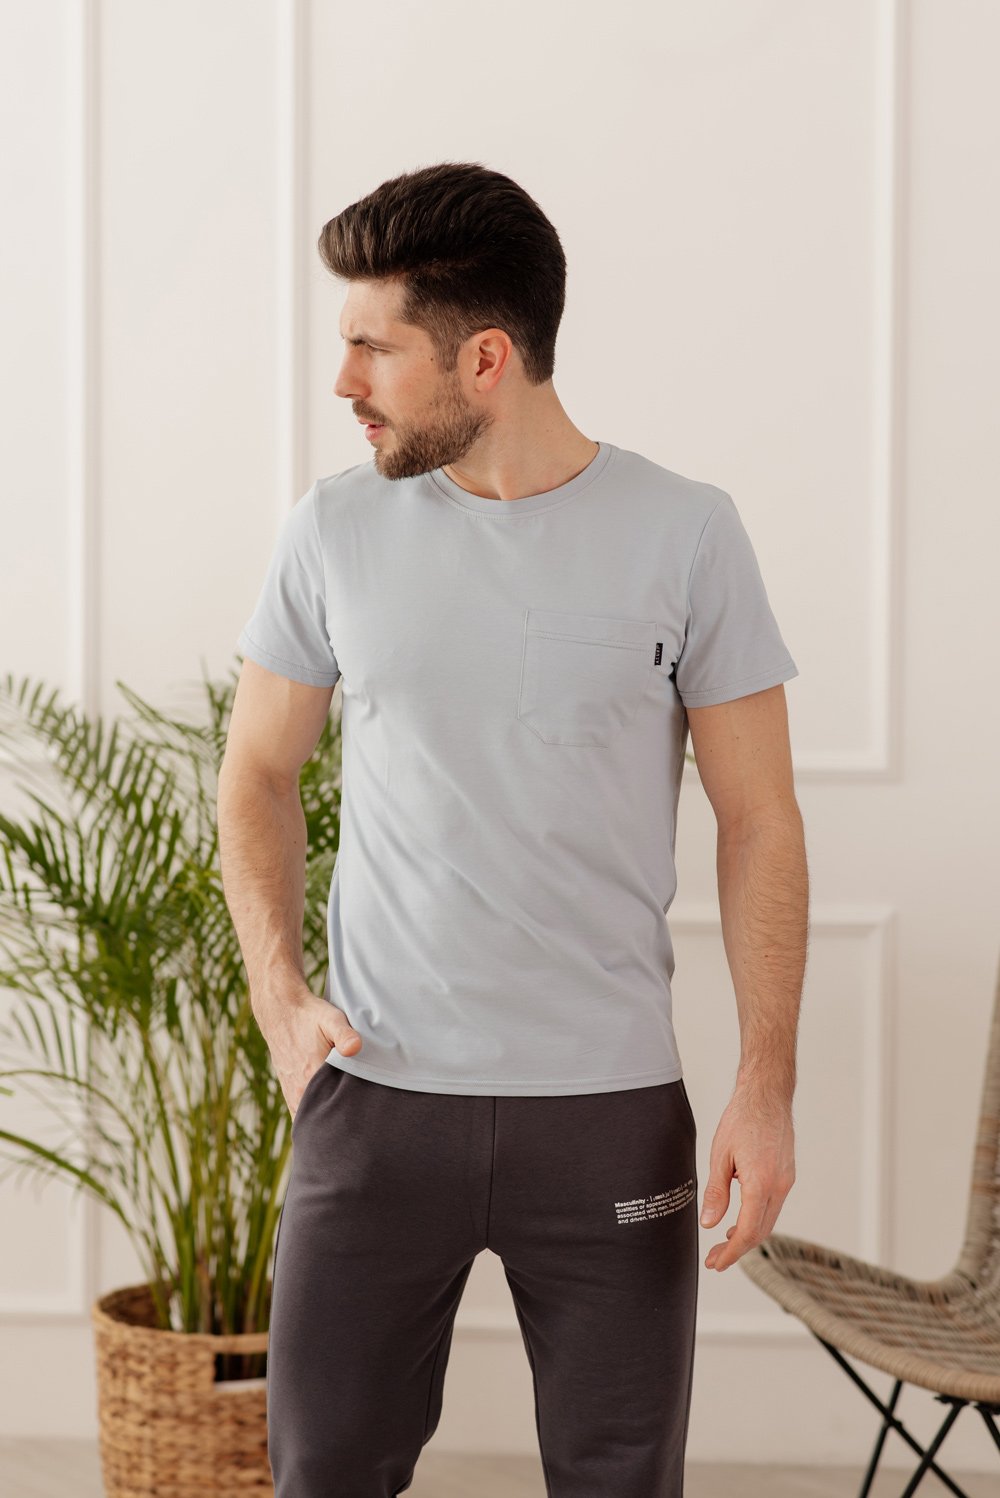 Gray and blue t-shirt with pocket